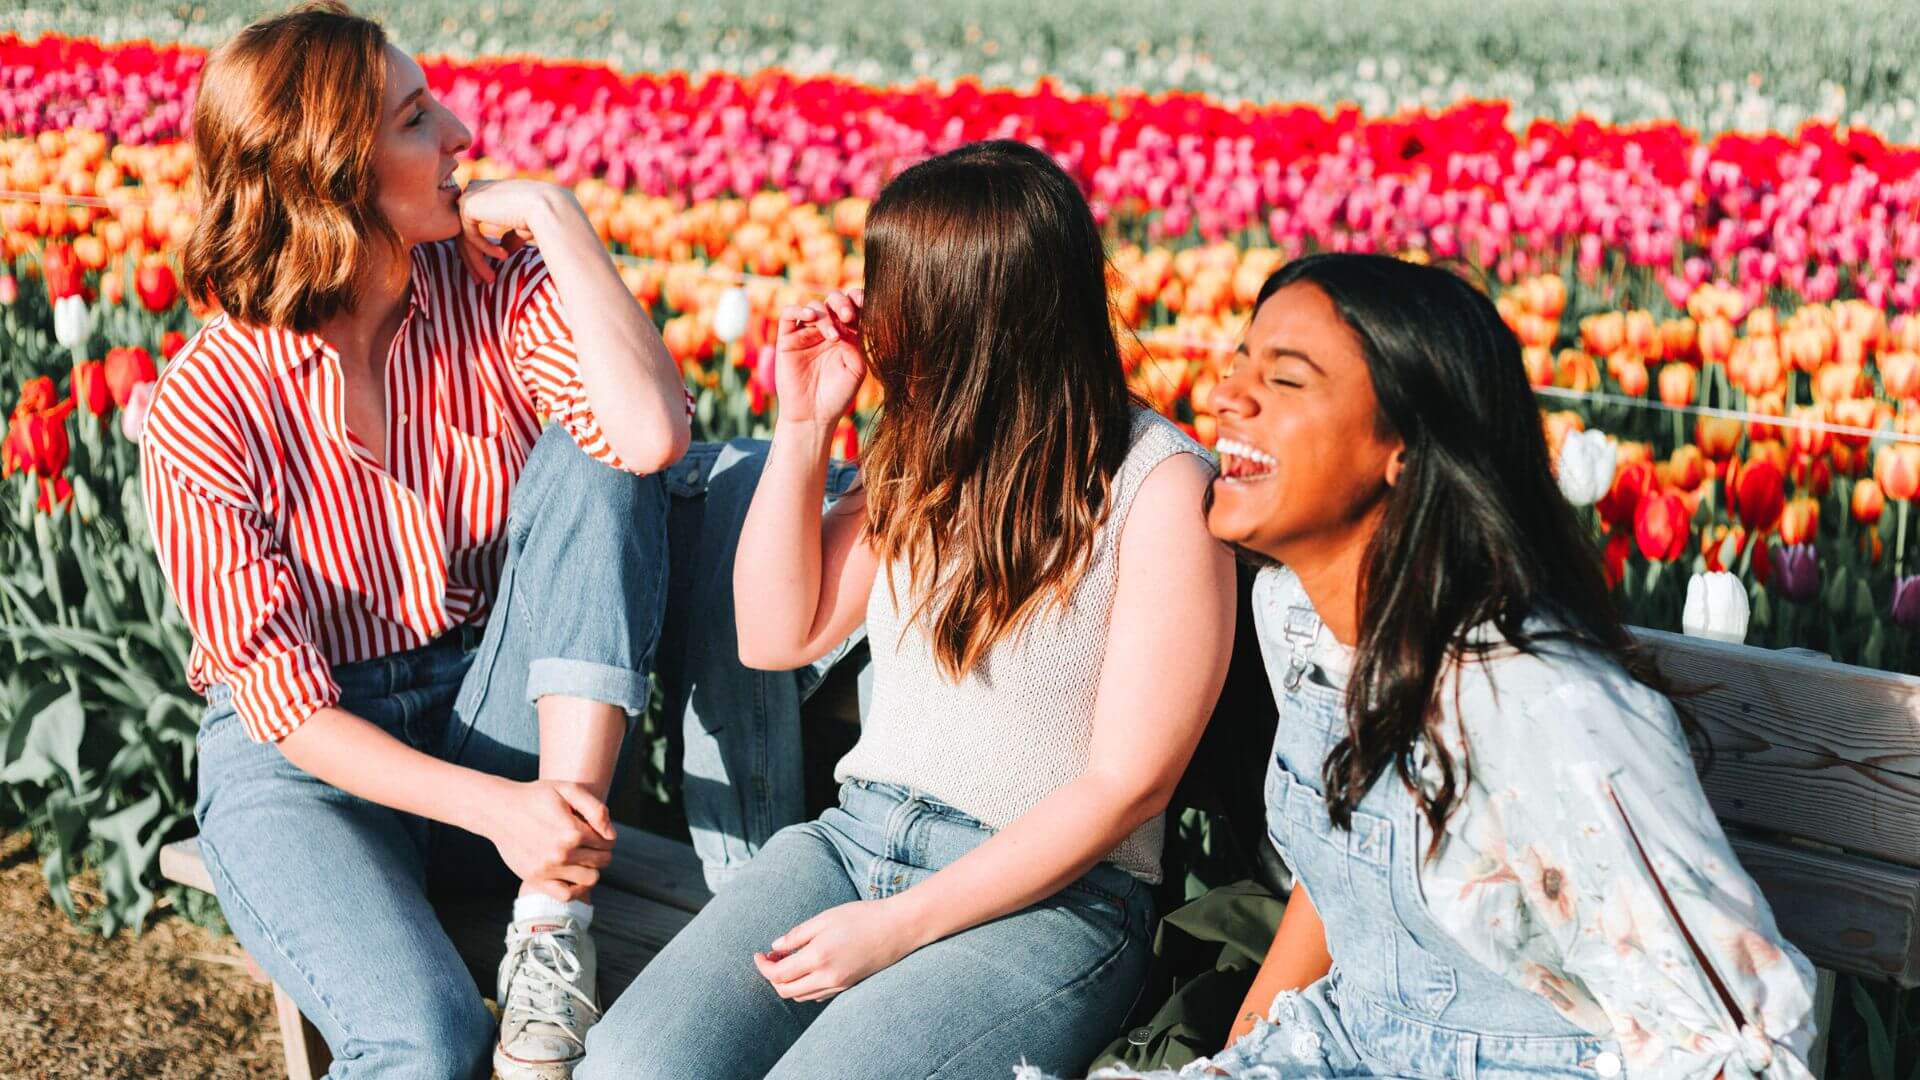 Three women sitting on a bench laughing in front of a large field of tulips.